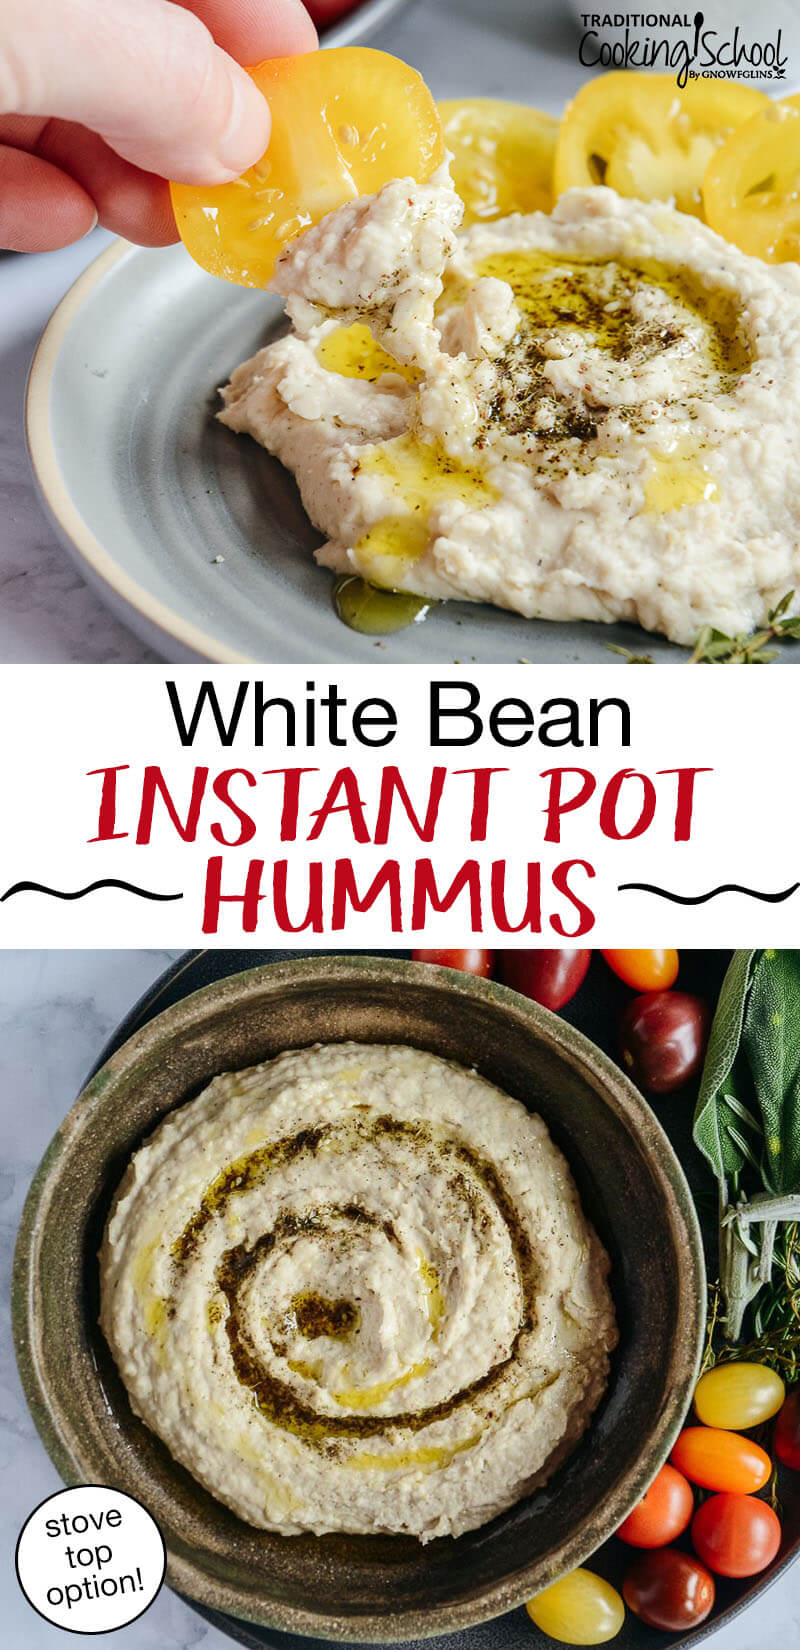 photo collage of hummus swirled with za'atar and olive oil, with text overlay: "White Bean Instant Pot Hummus (stove top option!)"